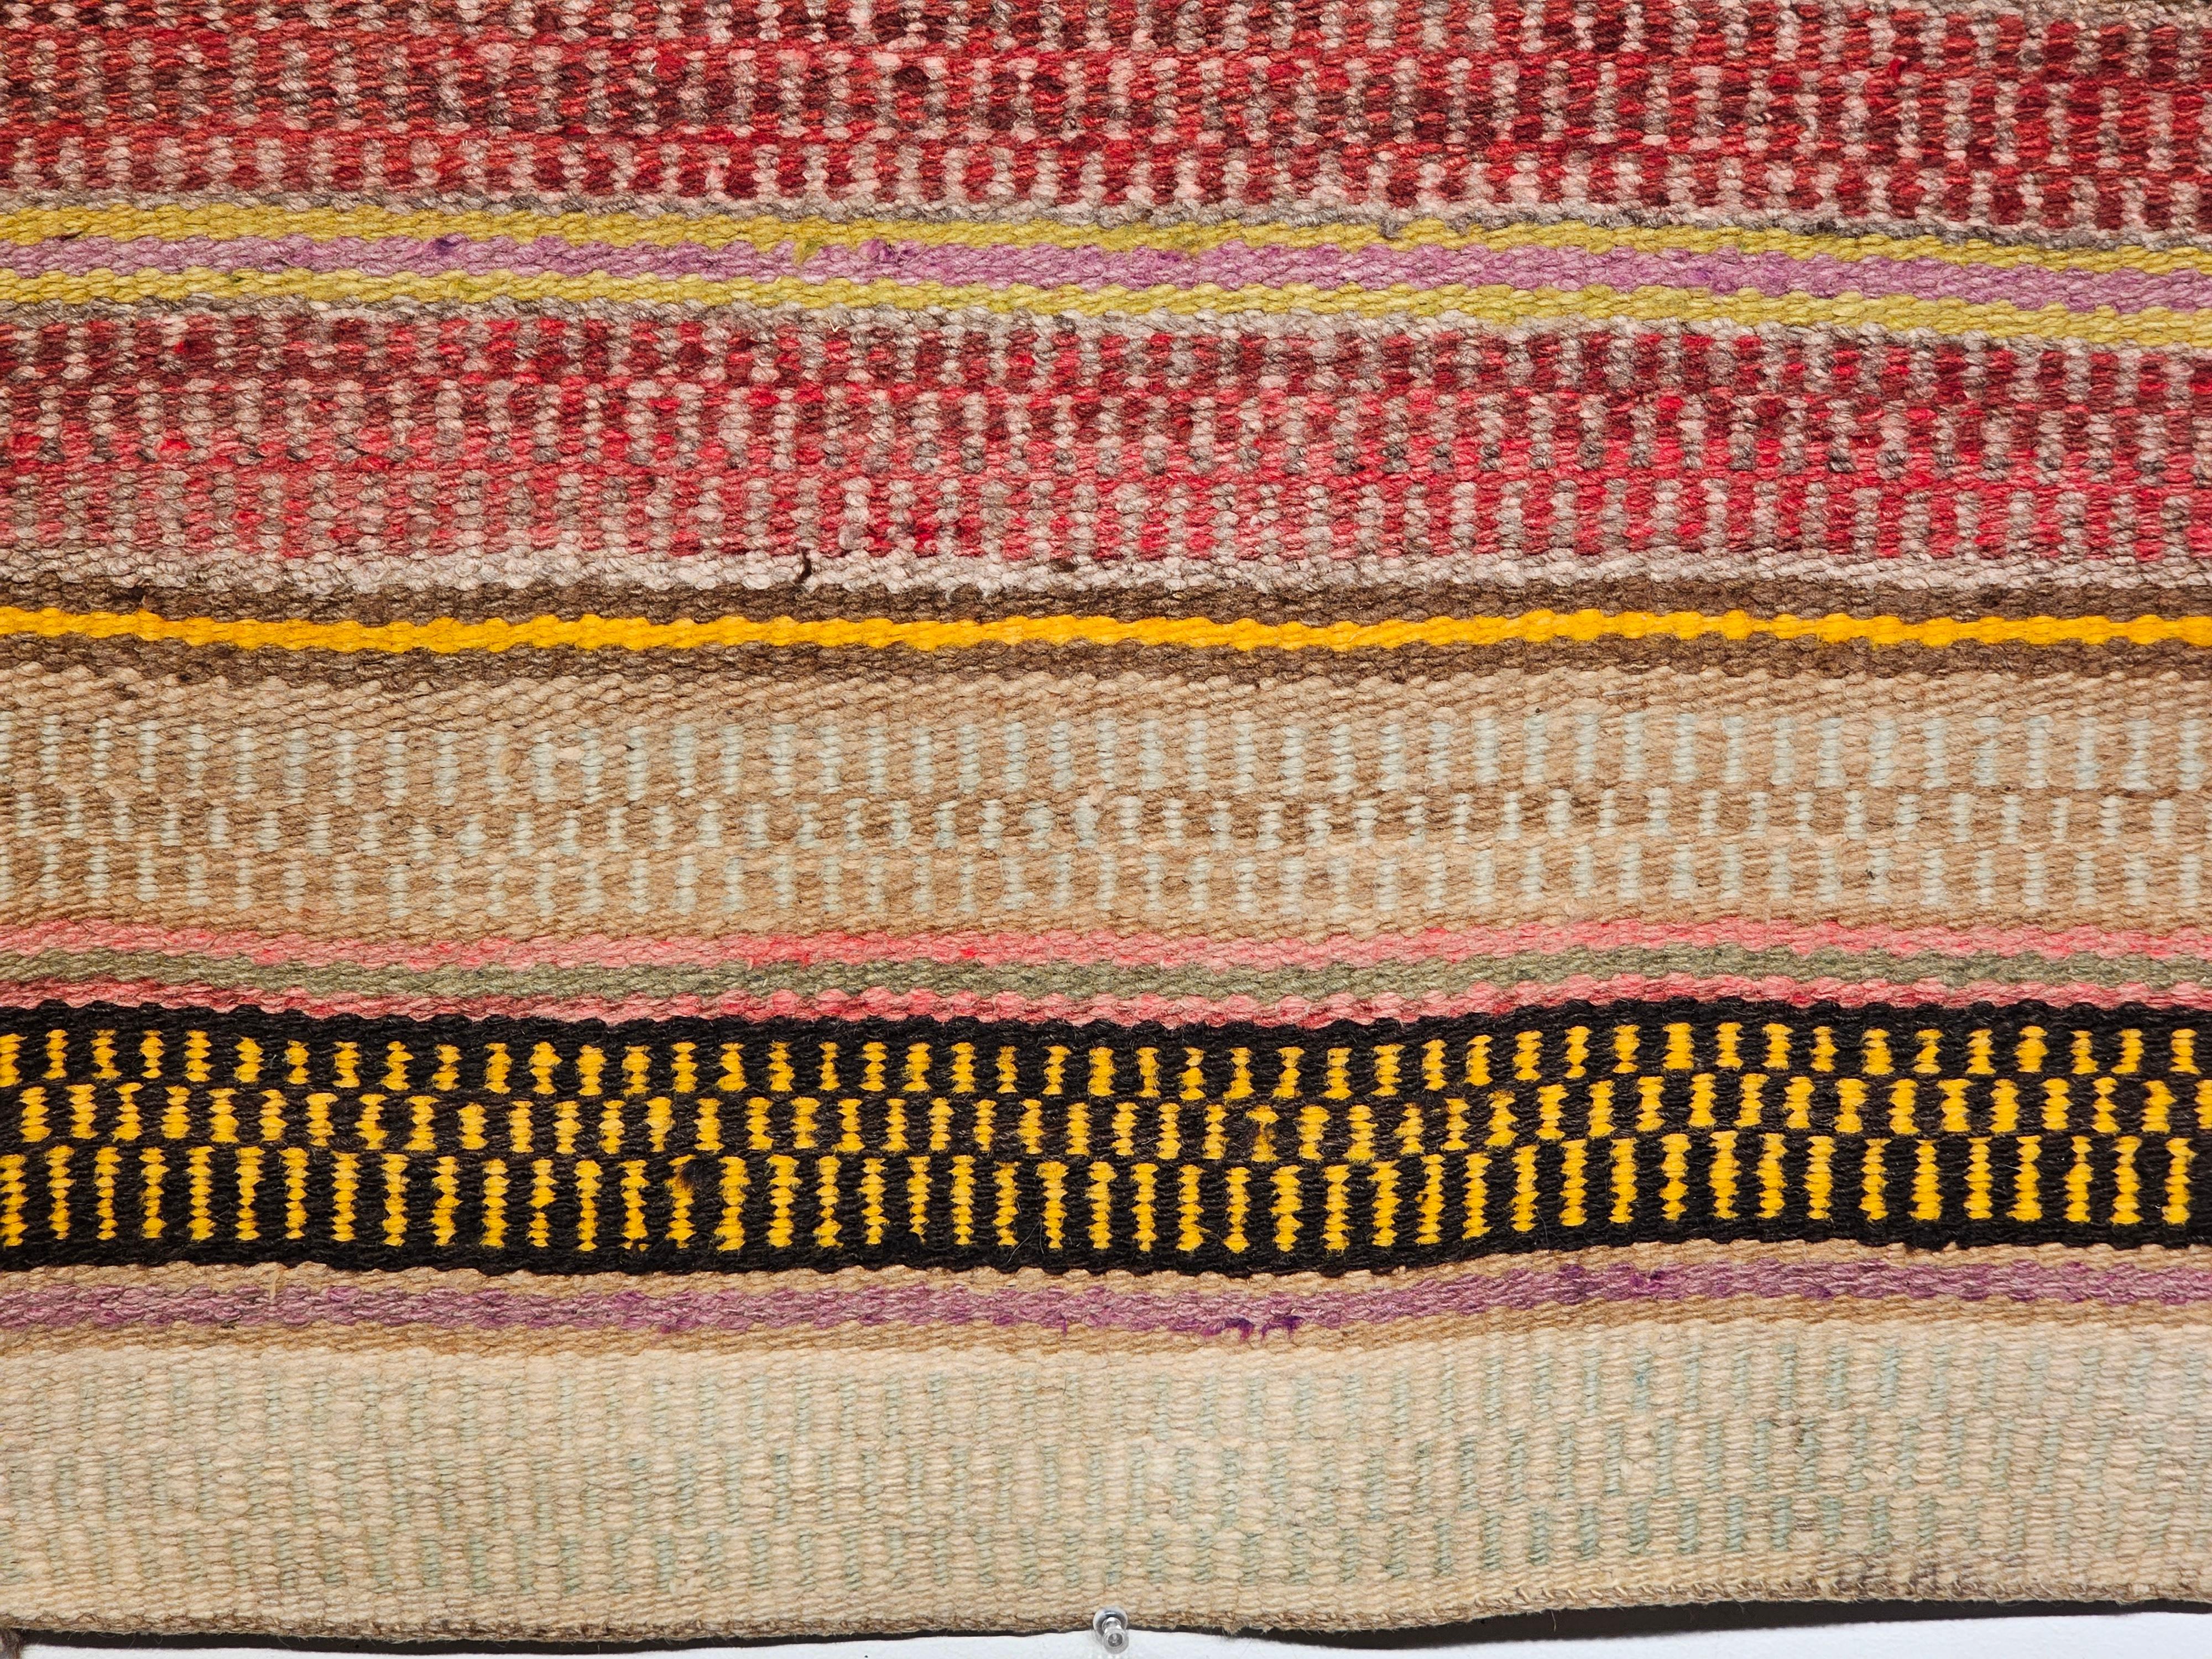  A Navajo saddle blanket in banded design with beautiful natural earth tone colors including red, brown, caramel set on a taupe background separated by narrow bands from the mid 1900s..  The design of this Navajo rug resembles the design of the